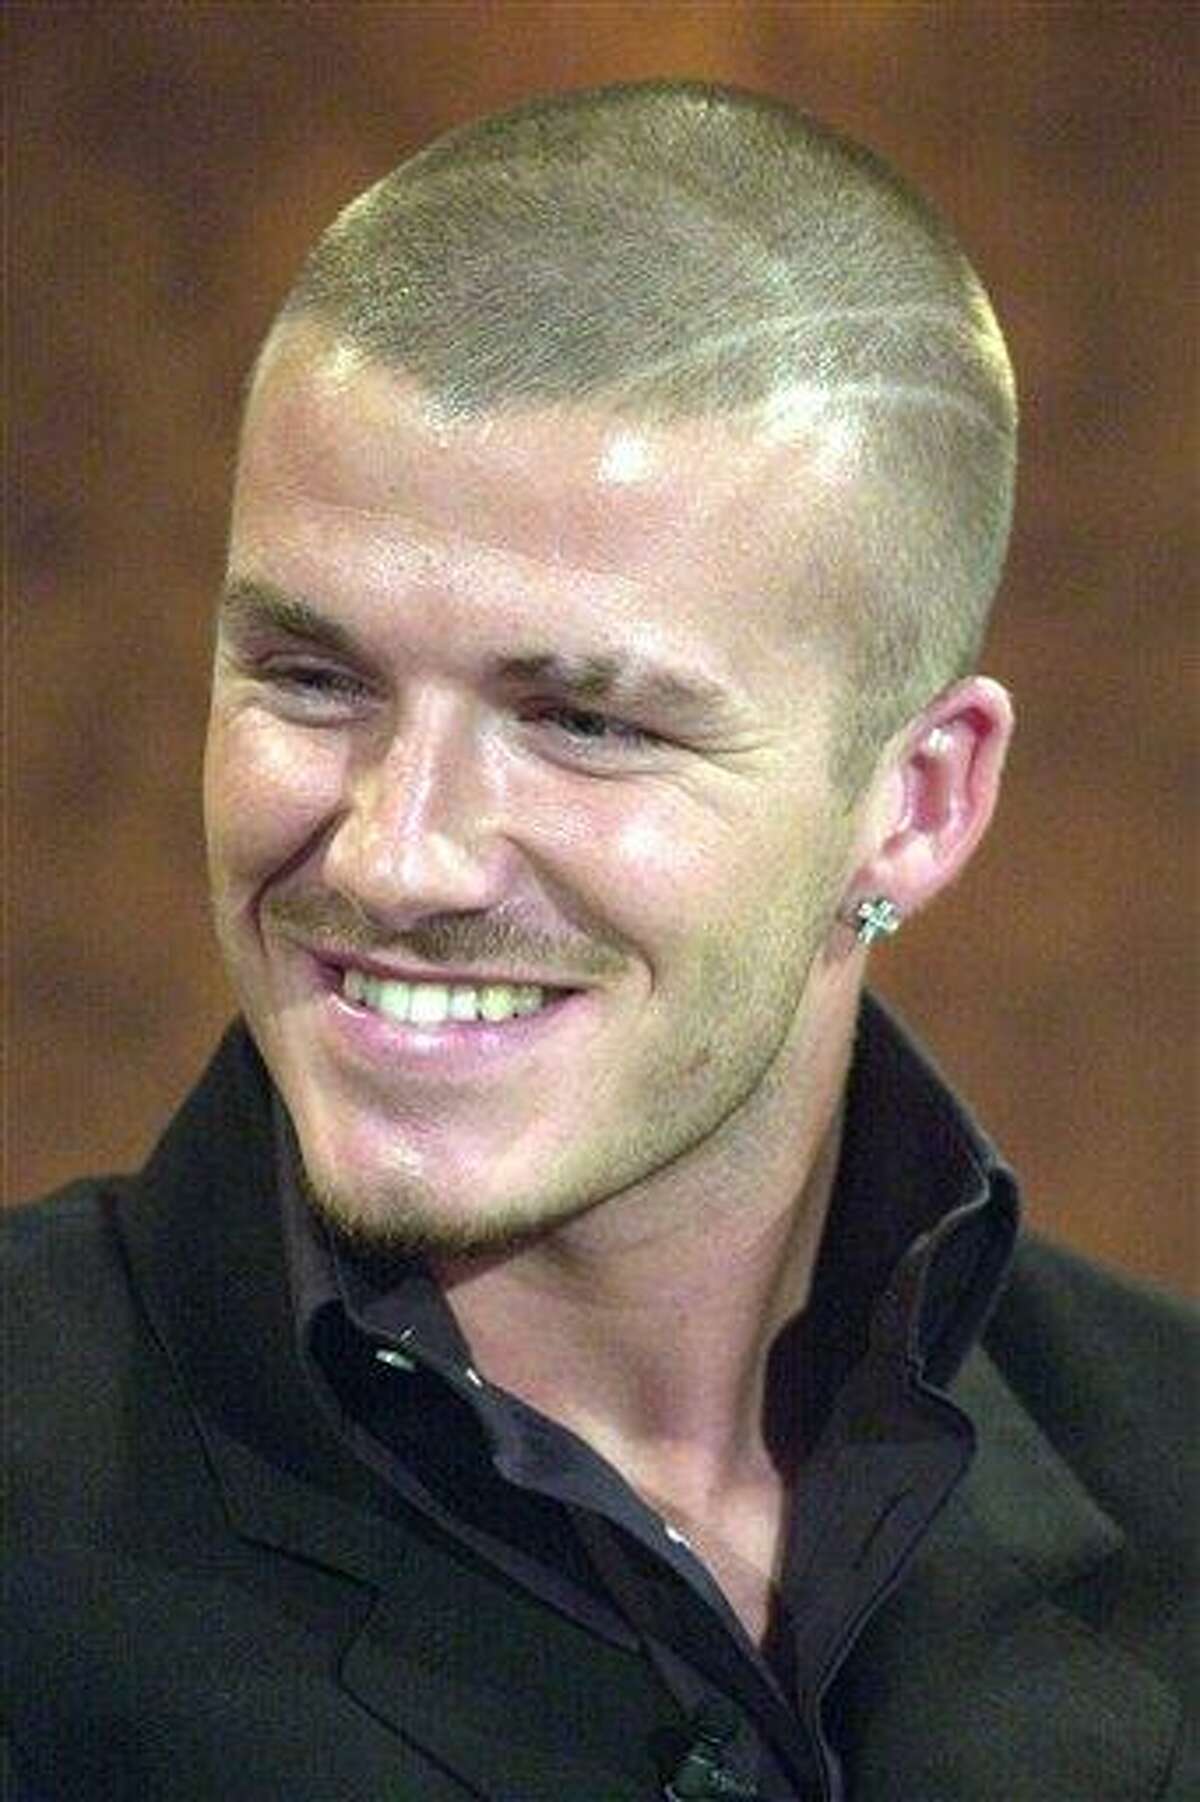 FILE - This is a Oct. 13, 2001 file photo of Soccer player David Beckham during an episode of the German television show in Erfurt, Germany. David Beckham is retiring from soccer after the season, ending a career in which he become a global superstar since starting his career at Manchester United. The 38-year-old Englishman recently won a league title in a fourth country with Paris Saint-Germain. He said in a statement Thursday May 16, 2013 he is "thankful to PSG for giving me the opportunity to continue but I feel now is the right time to finish my career, playing at the highest level." (AP File Photo/Jens Meyer)